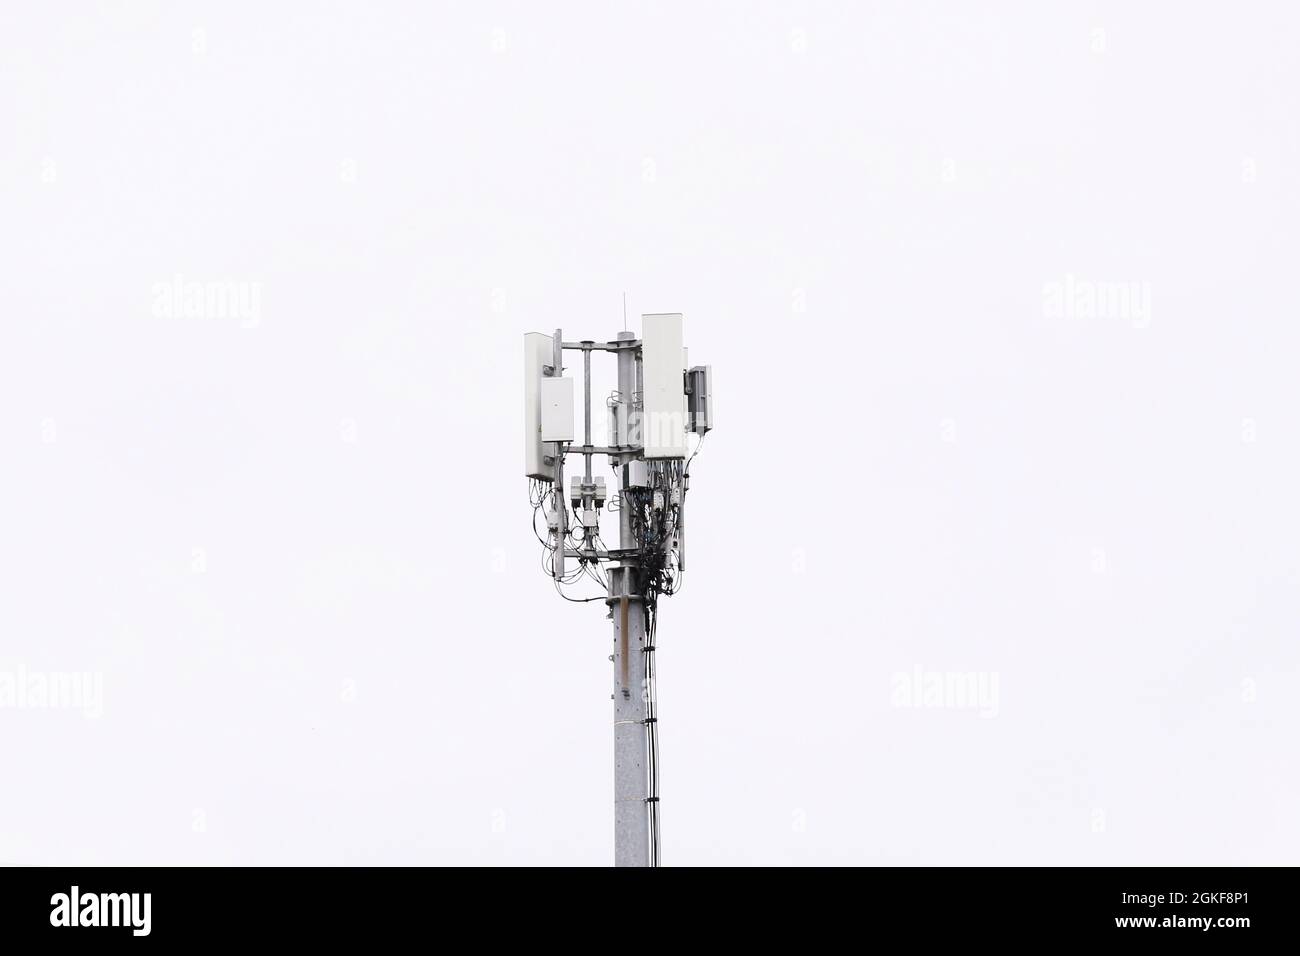 A mobile telephone communications mast as seen with a clear white sky over Belfast, Northern Ireland. Stock Photo